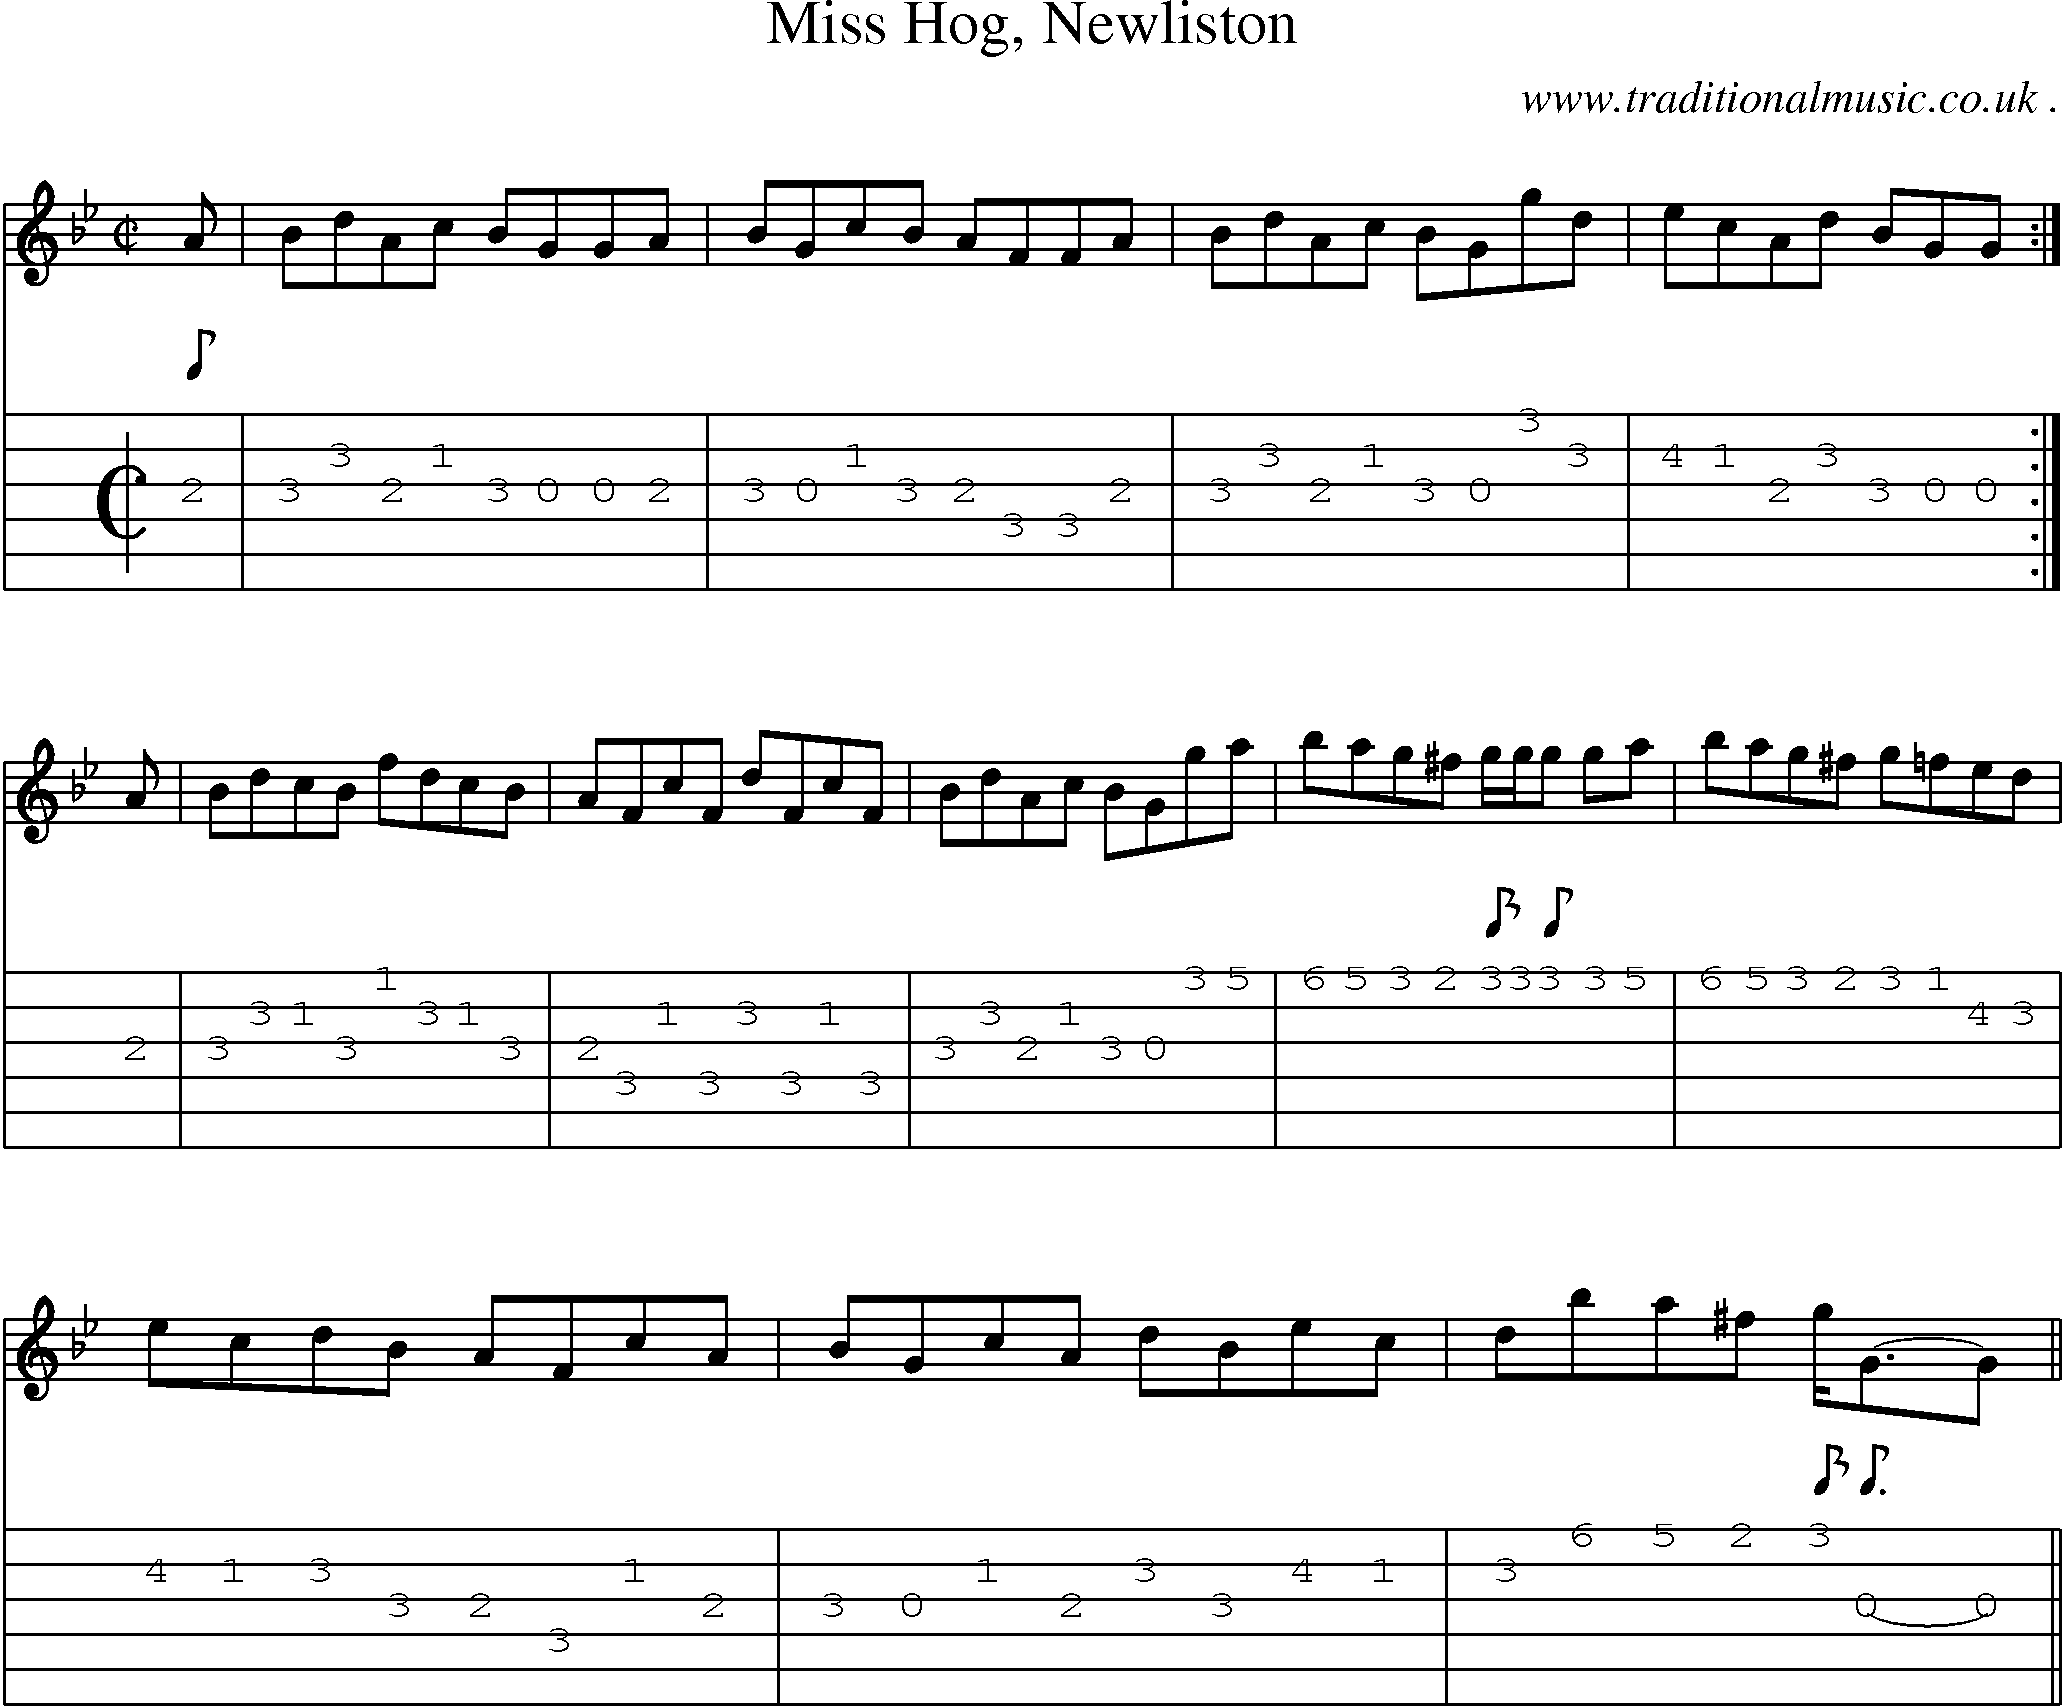 Sheet-music  score, Chords and Guitar Tabs for Miss Hog Newliston